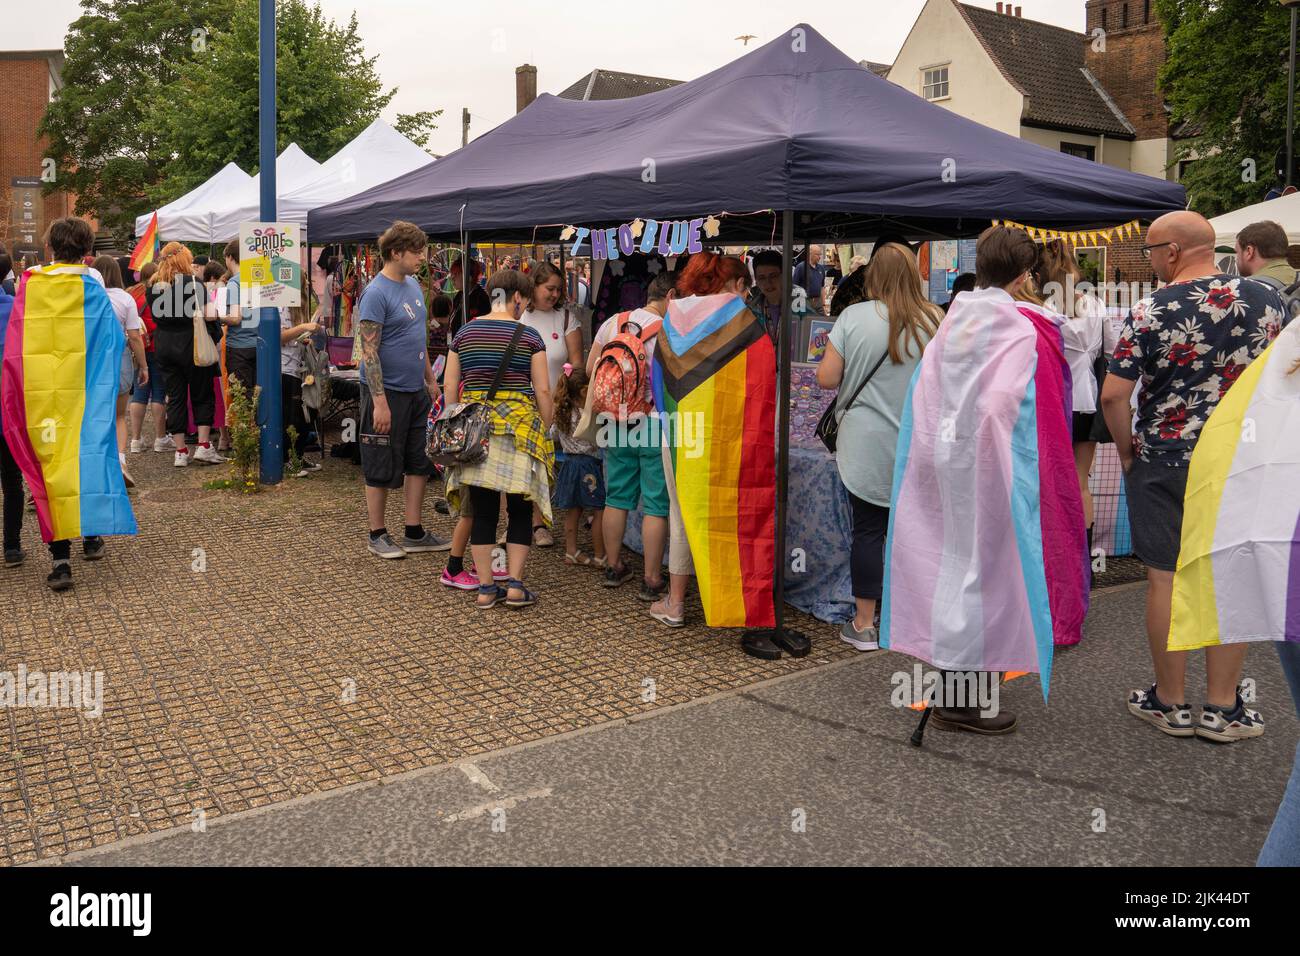 LGBT Pride stalls selling colourful goods Stock Photo